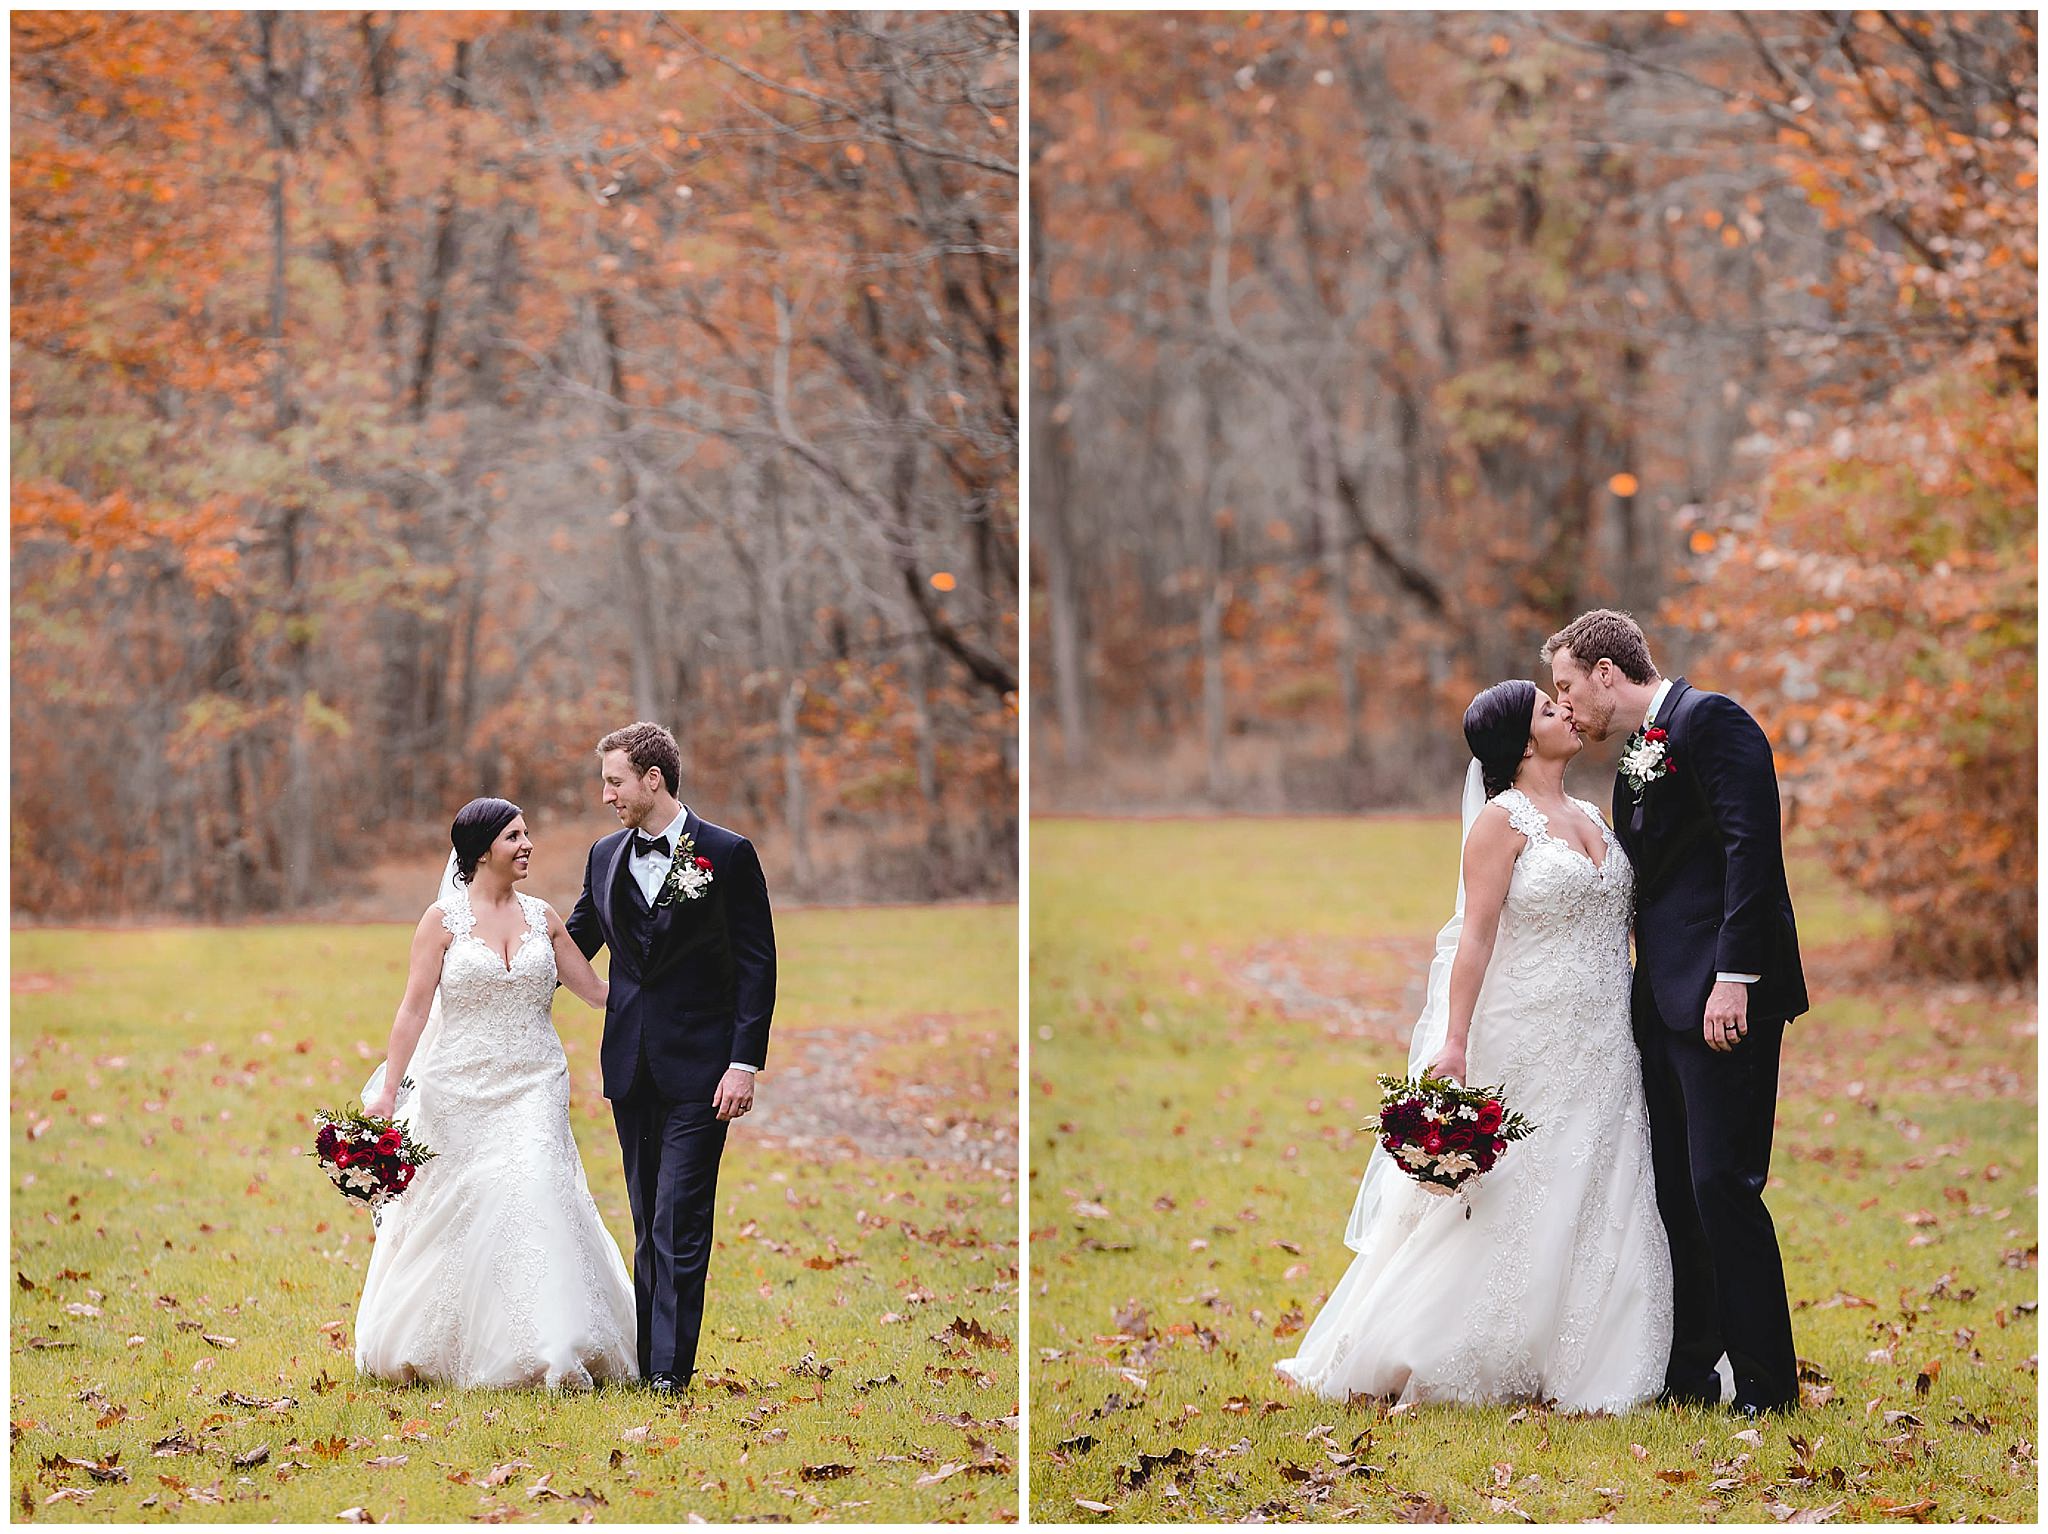 Bride and groom walk in a park of fall foliage on their October wedding day